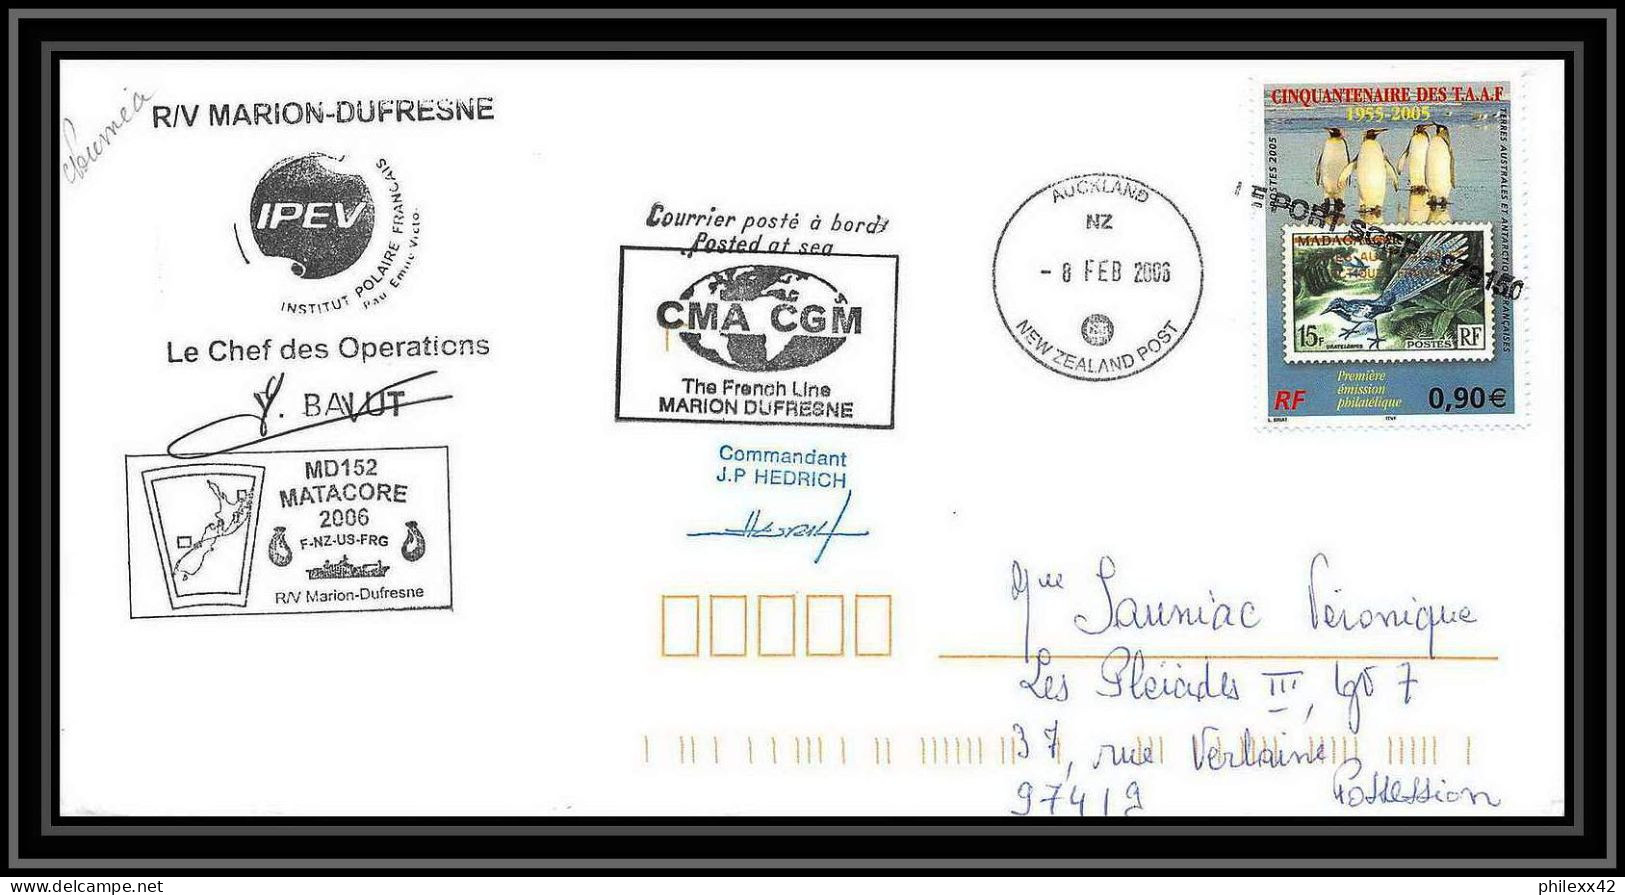 2560 ANTARCTIC NOUMEA Caledonie-Lettre Cover Dufresne 2 Signé Signed Md 152 8/2/2006 N°430 Obl Griffe - Antarktis-Expeditionen